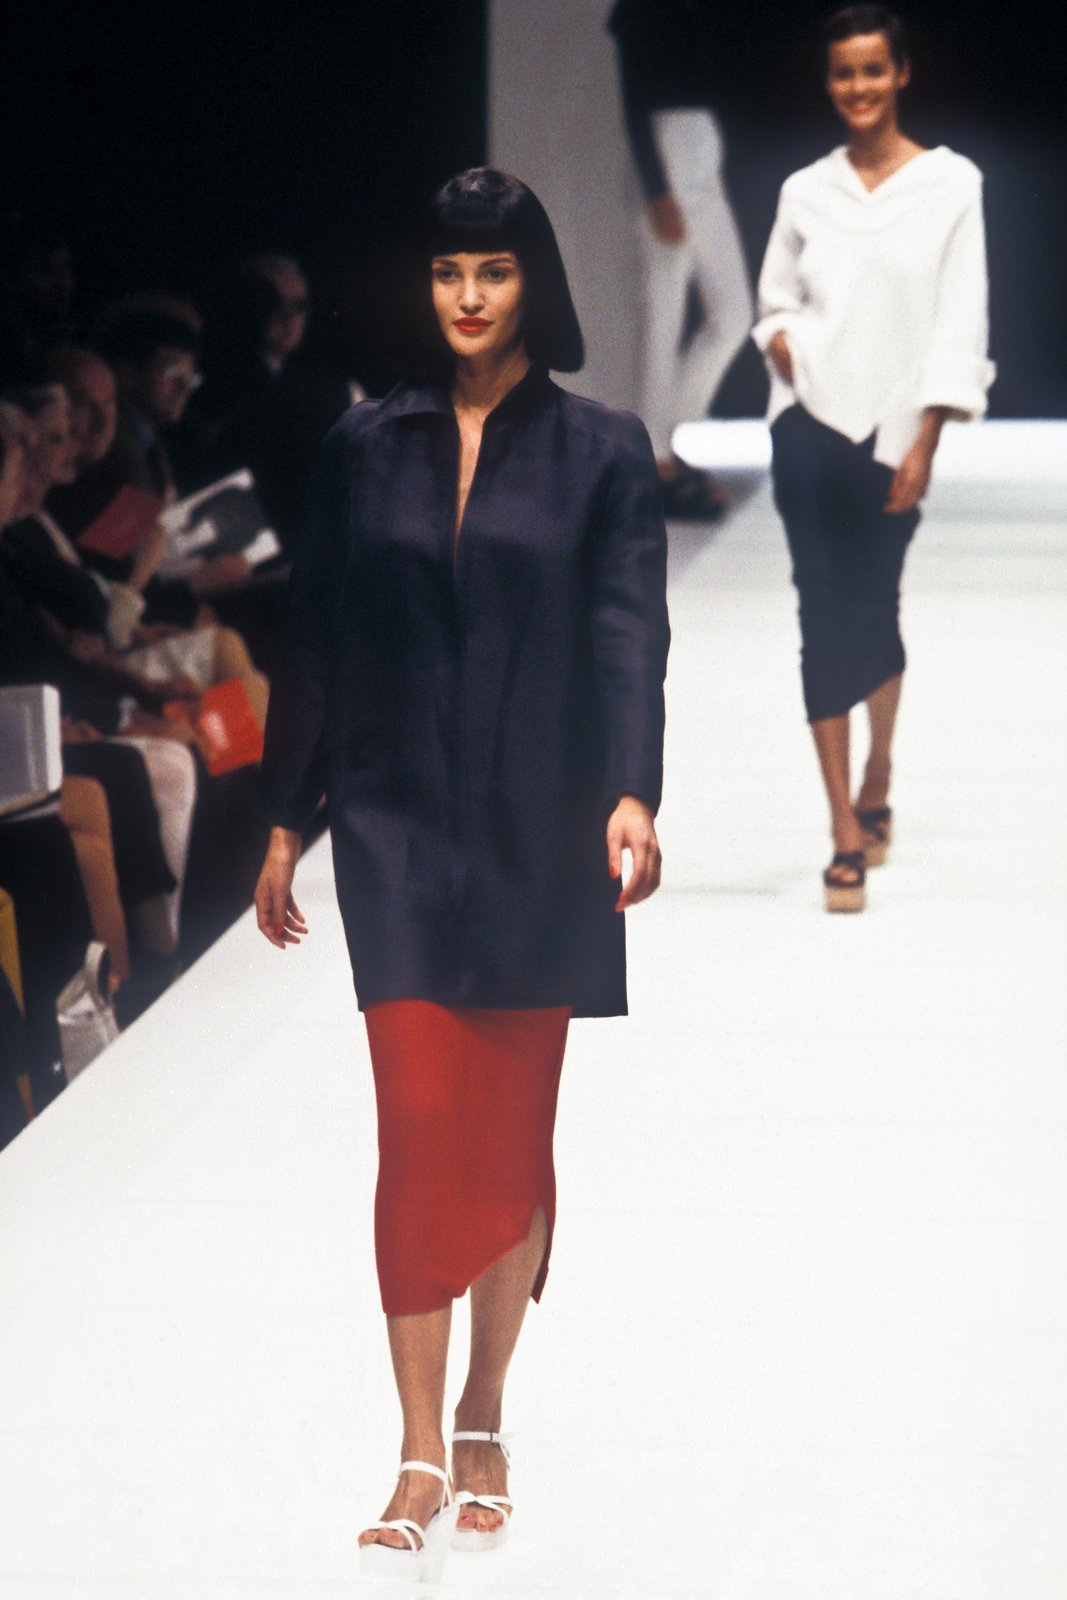 Fashion Classic: Gianfranco Ferre Spring/Summer 1996 | Page 3 ...